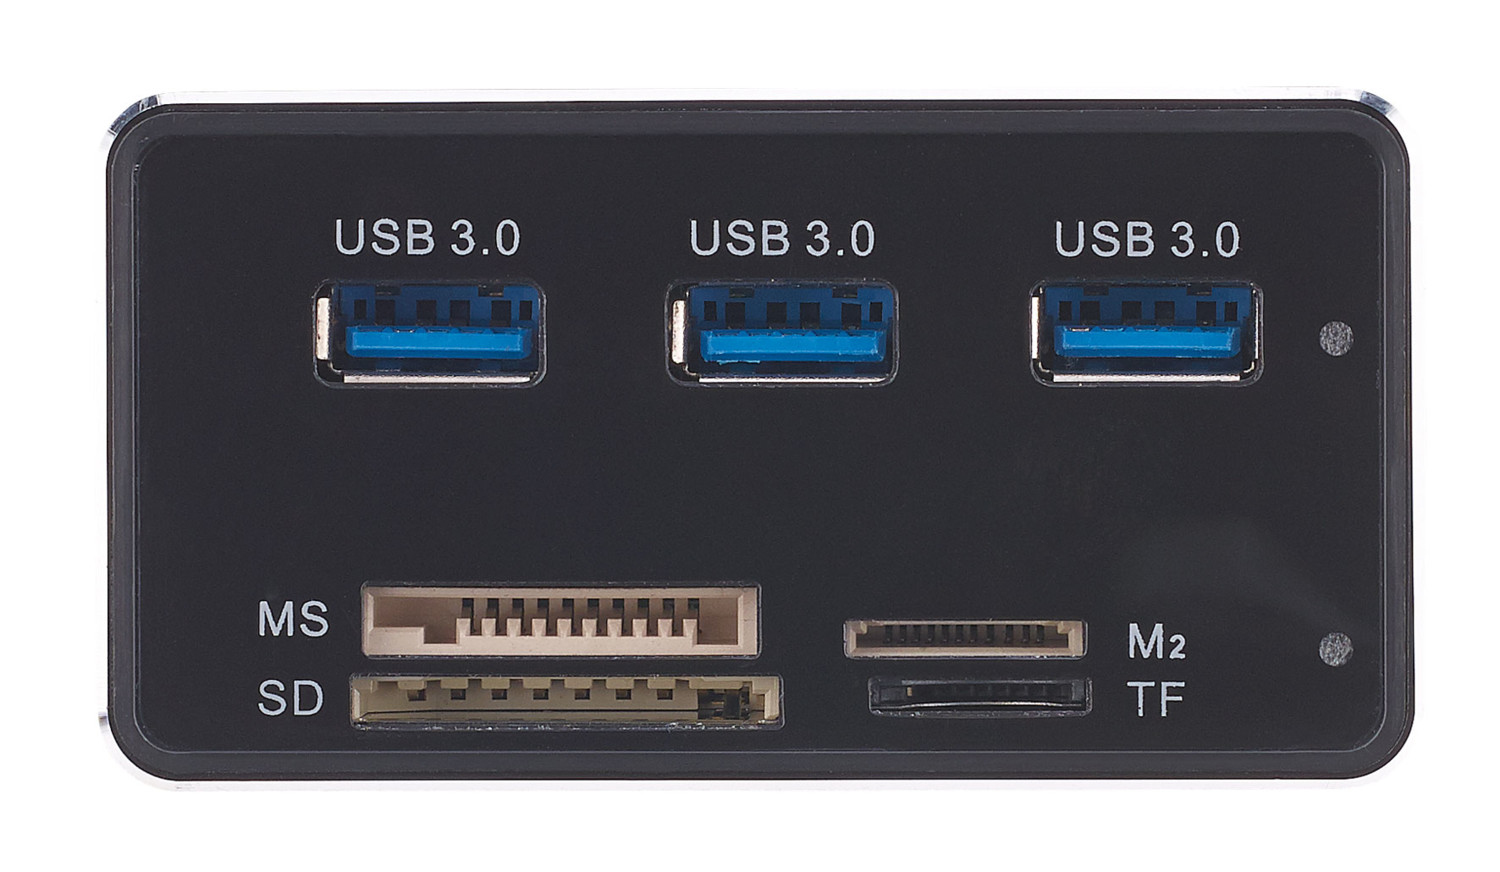 https://content.pearl.be/media/cache/default/article_ultralarge_high_nocrop/shared/images/articles/P/PX1/hub3-ports-usb-3-0-lecteur-de-cartes-sd-micro-sd-ms-m2-ref_PX1916_5.jpg